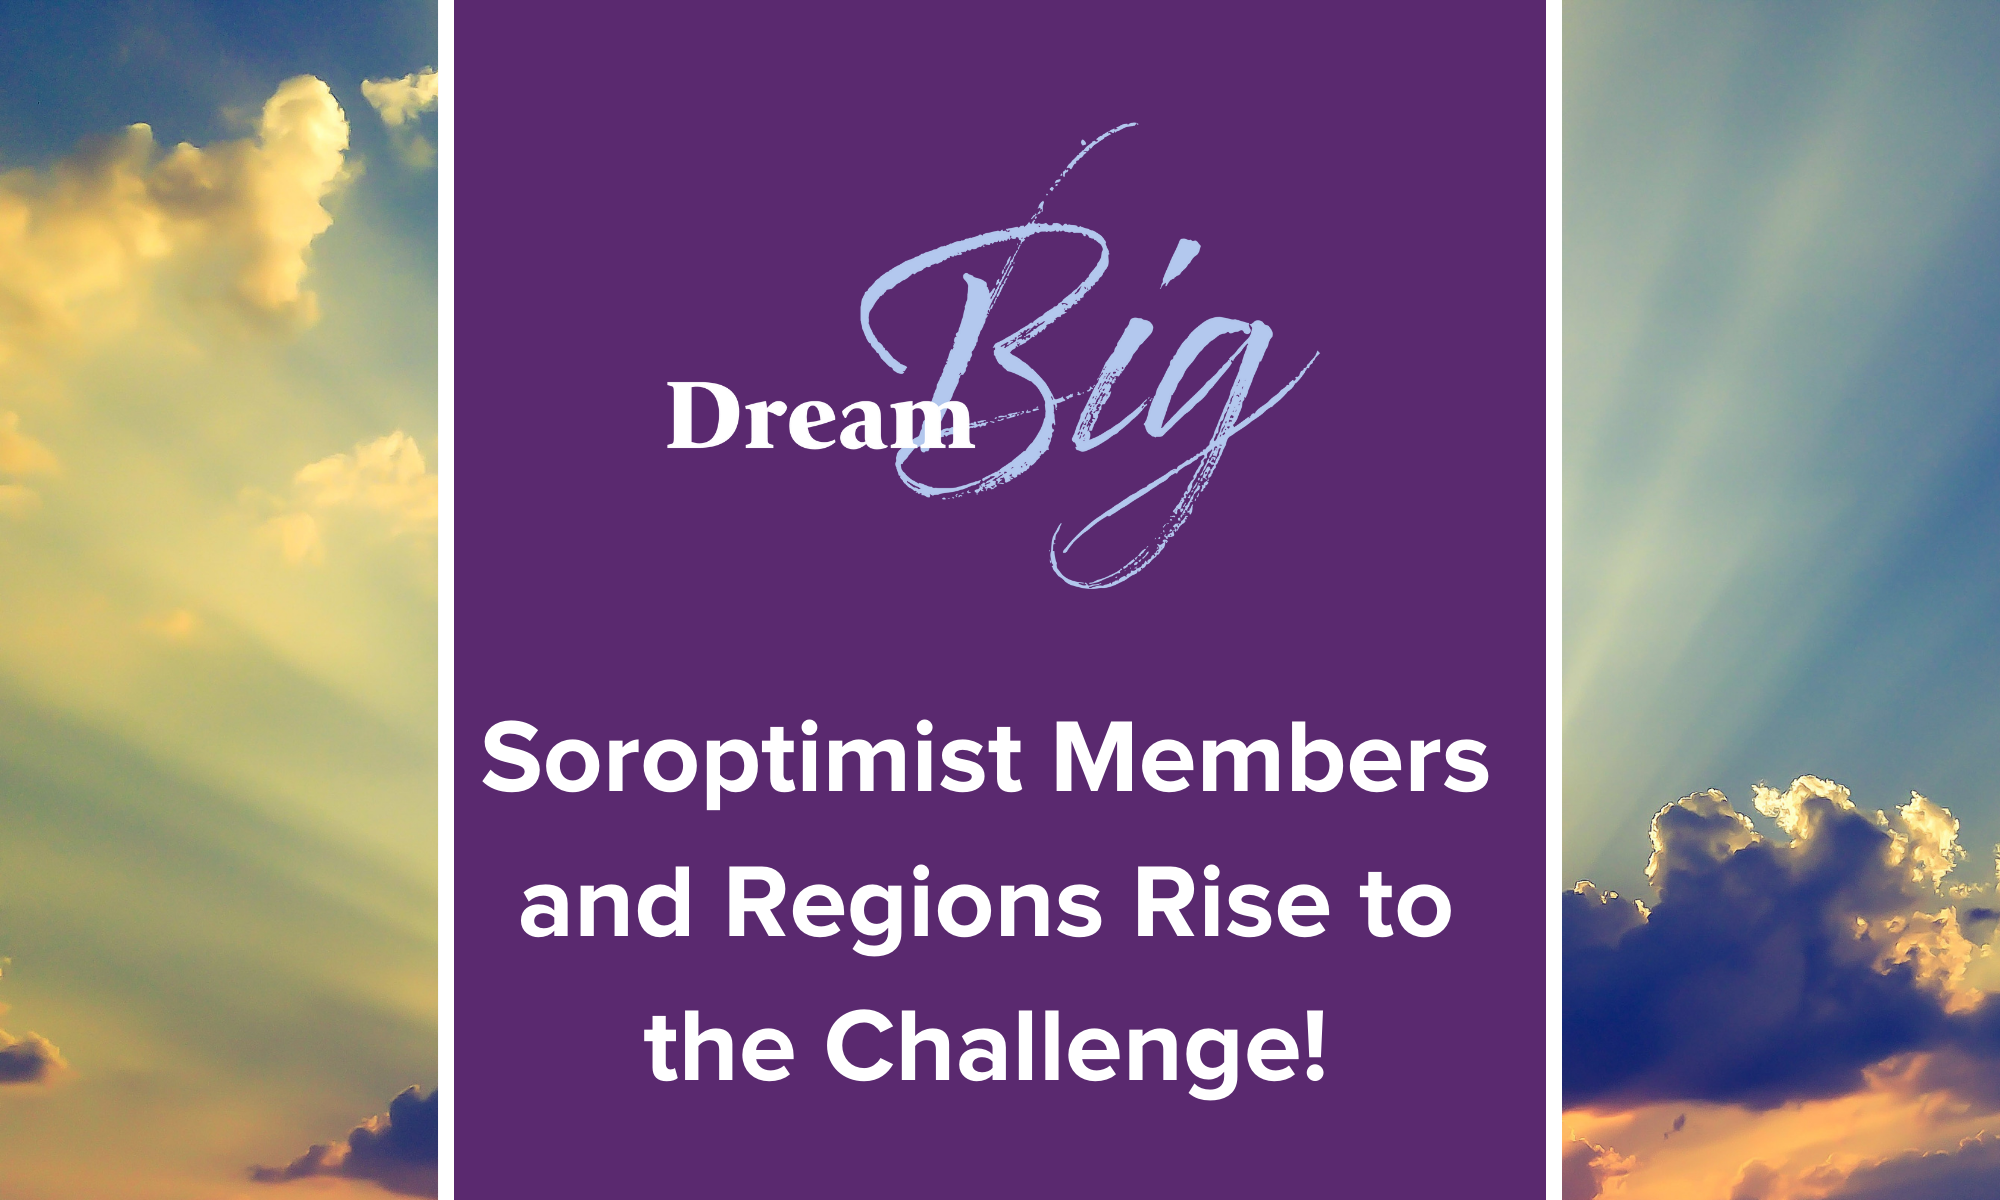 Soroptimist Members and Regions Rise to the Challenge